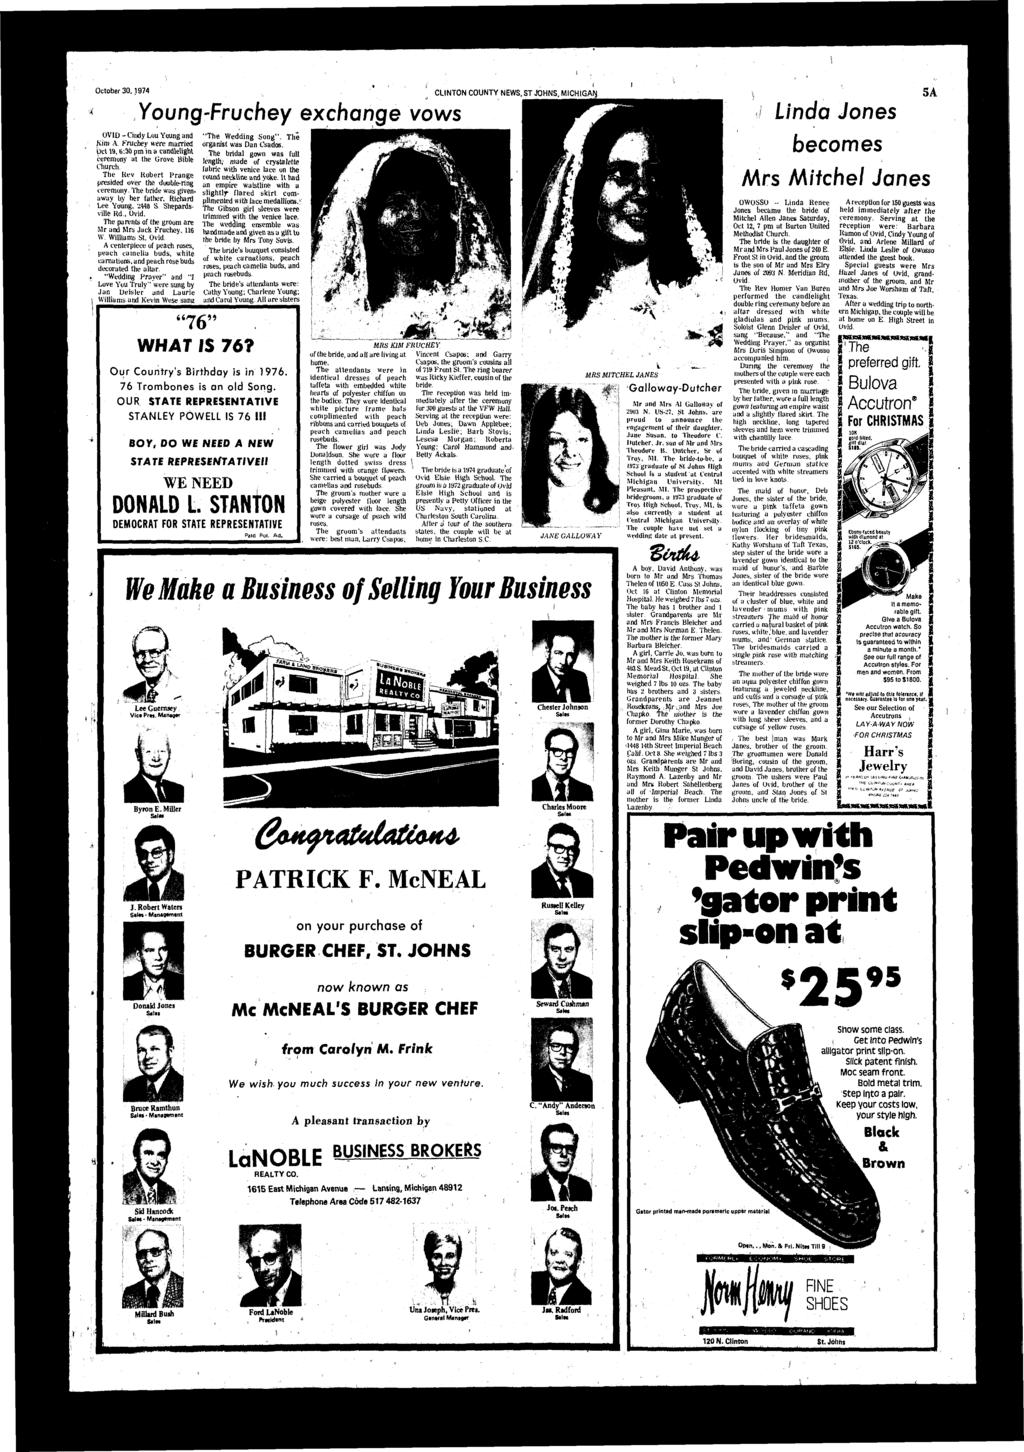 October 30,1974 CLINTON COUNTY NEWS, ST JOHNS, MICHIGAN Young-Fruchey exchnge vows OVI -Cindy Lou Young Kim A. Fruchey were mrried but 19,6:30 pm in clelight ceremony t the Grove Bible Church.